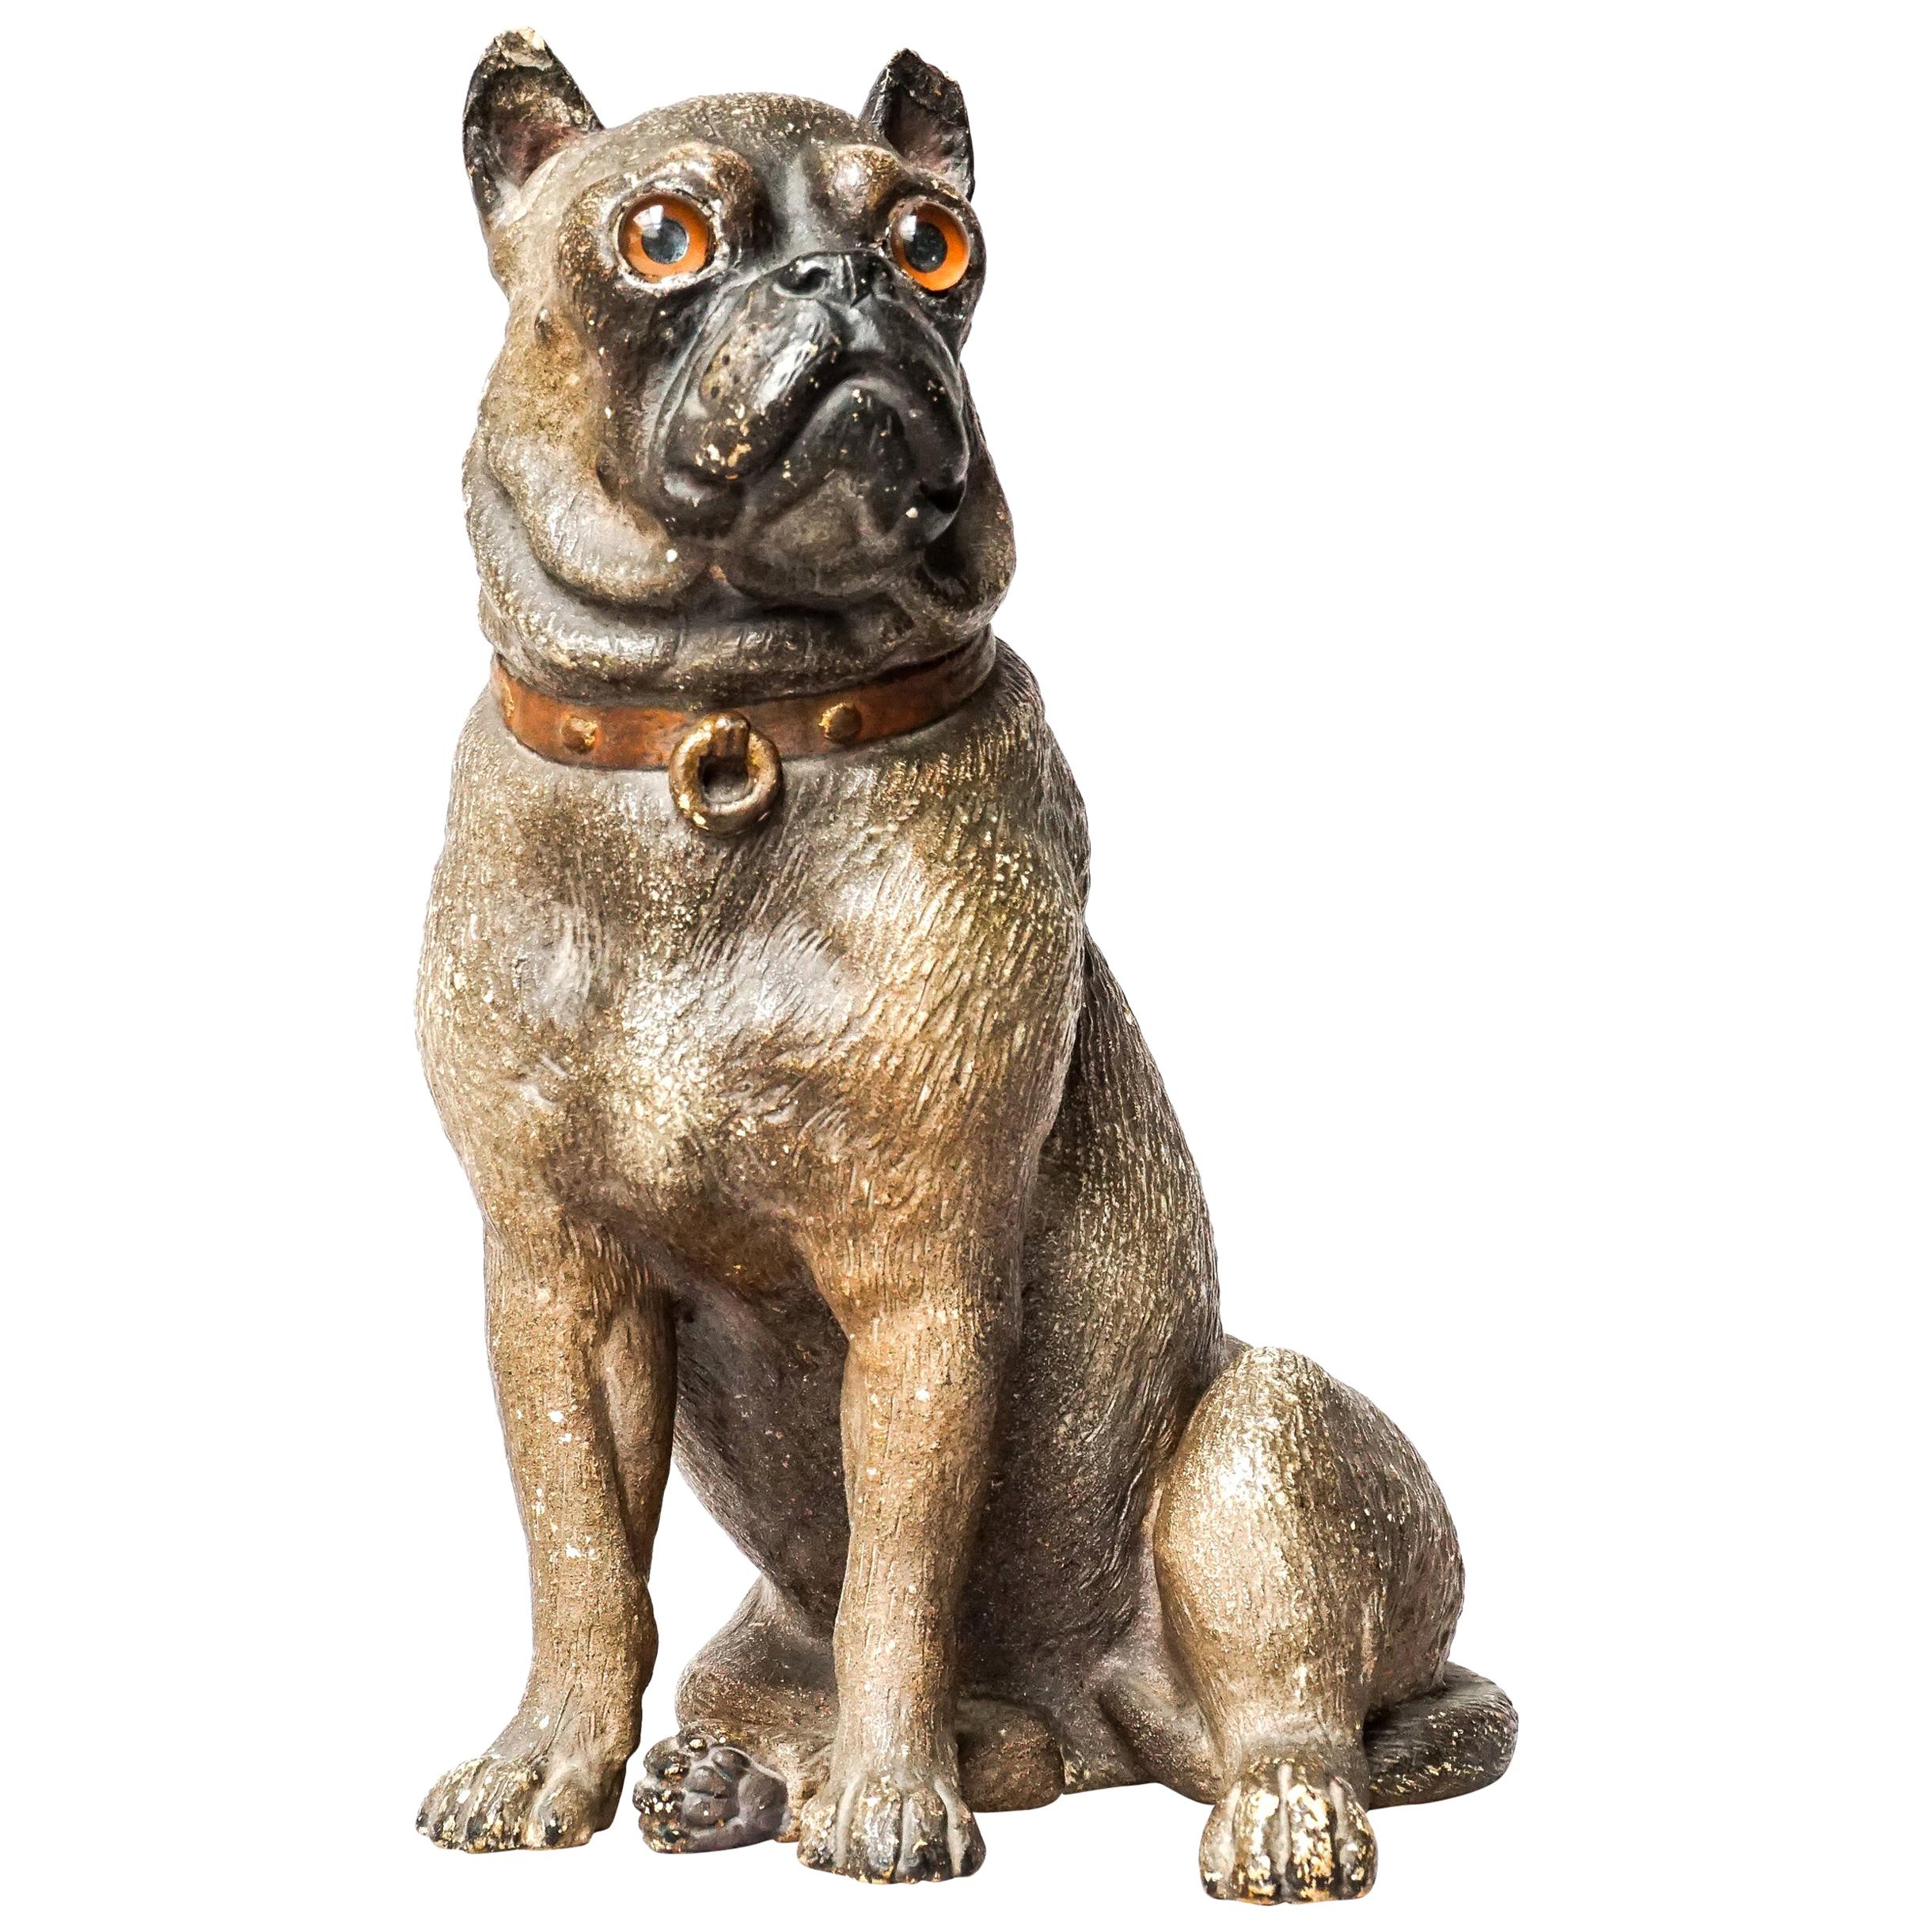 19th Century Austrian Seated Ceramic Pug Dog with Red Collar and Glass Eyes